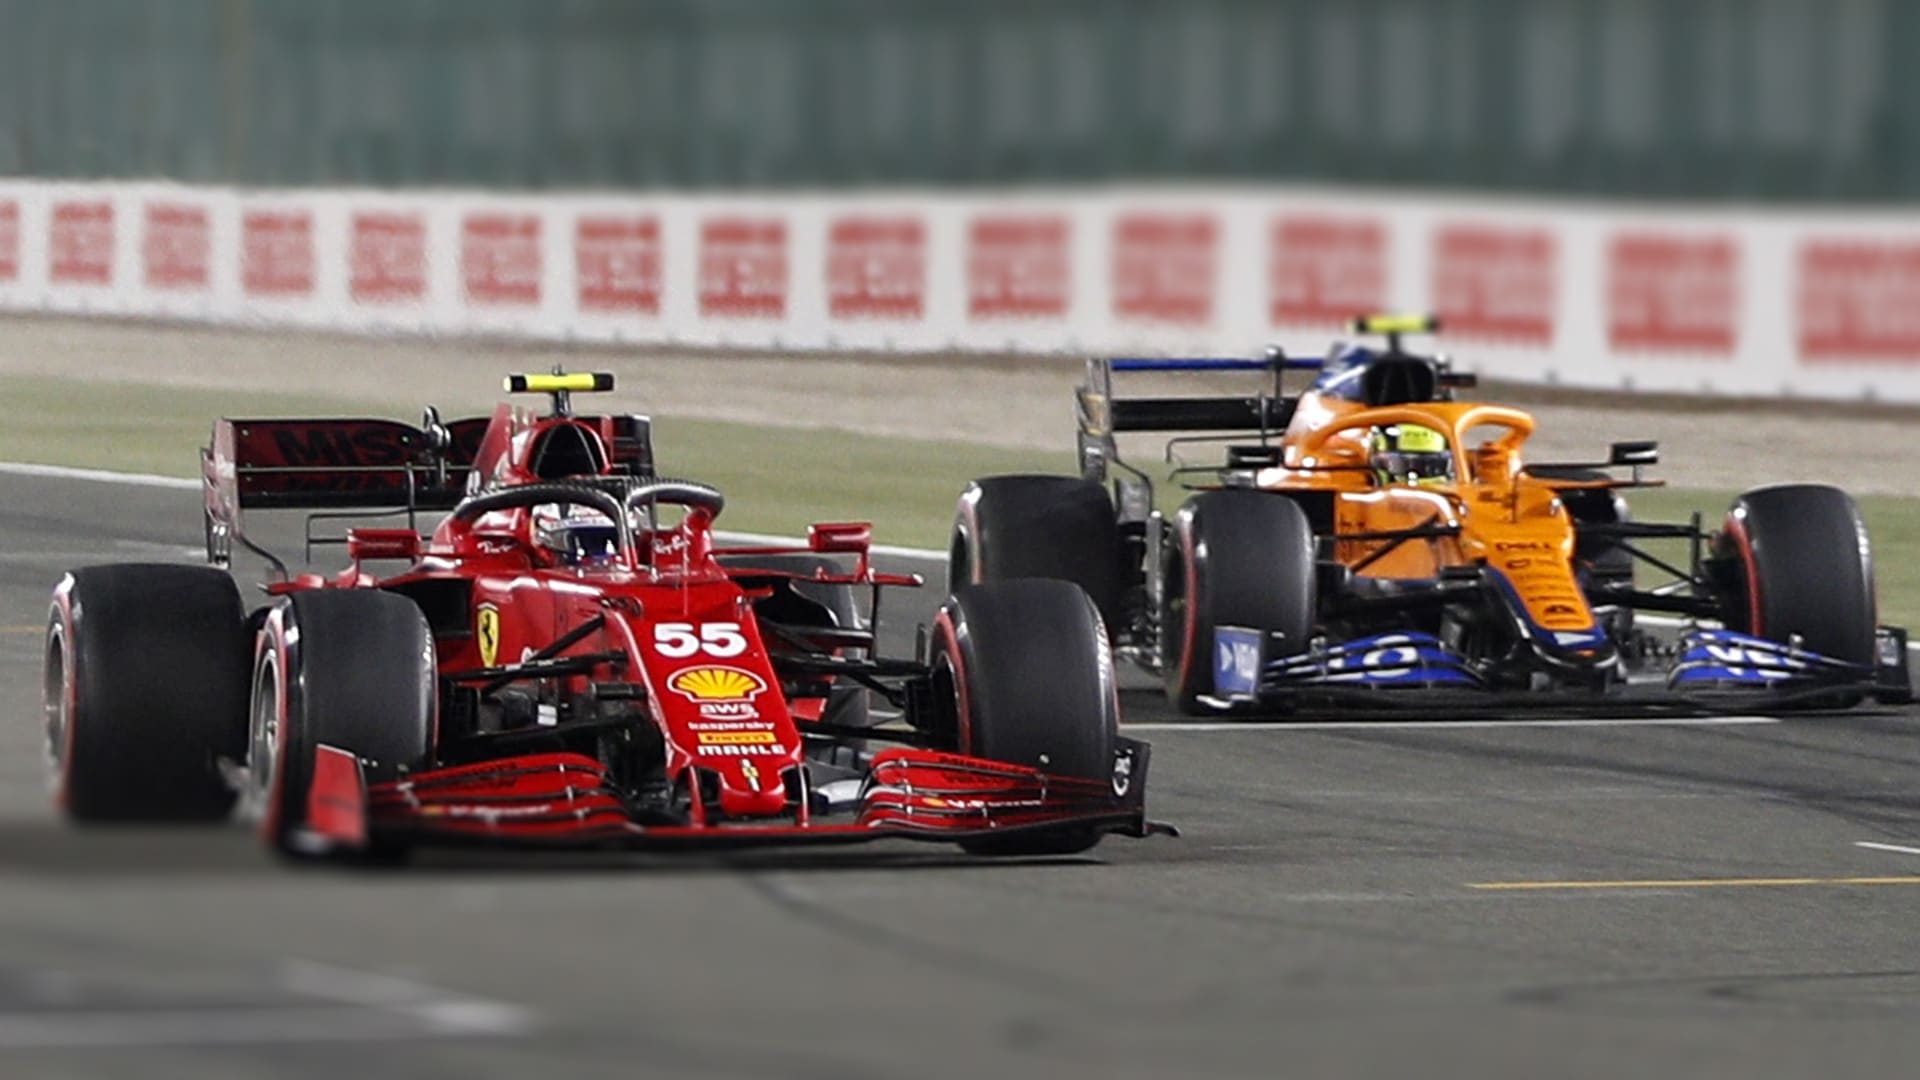 Ferrari drivers coy over chance of taking P3 in Jeddah as McLaren duo exude confidence Formula 1®